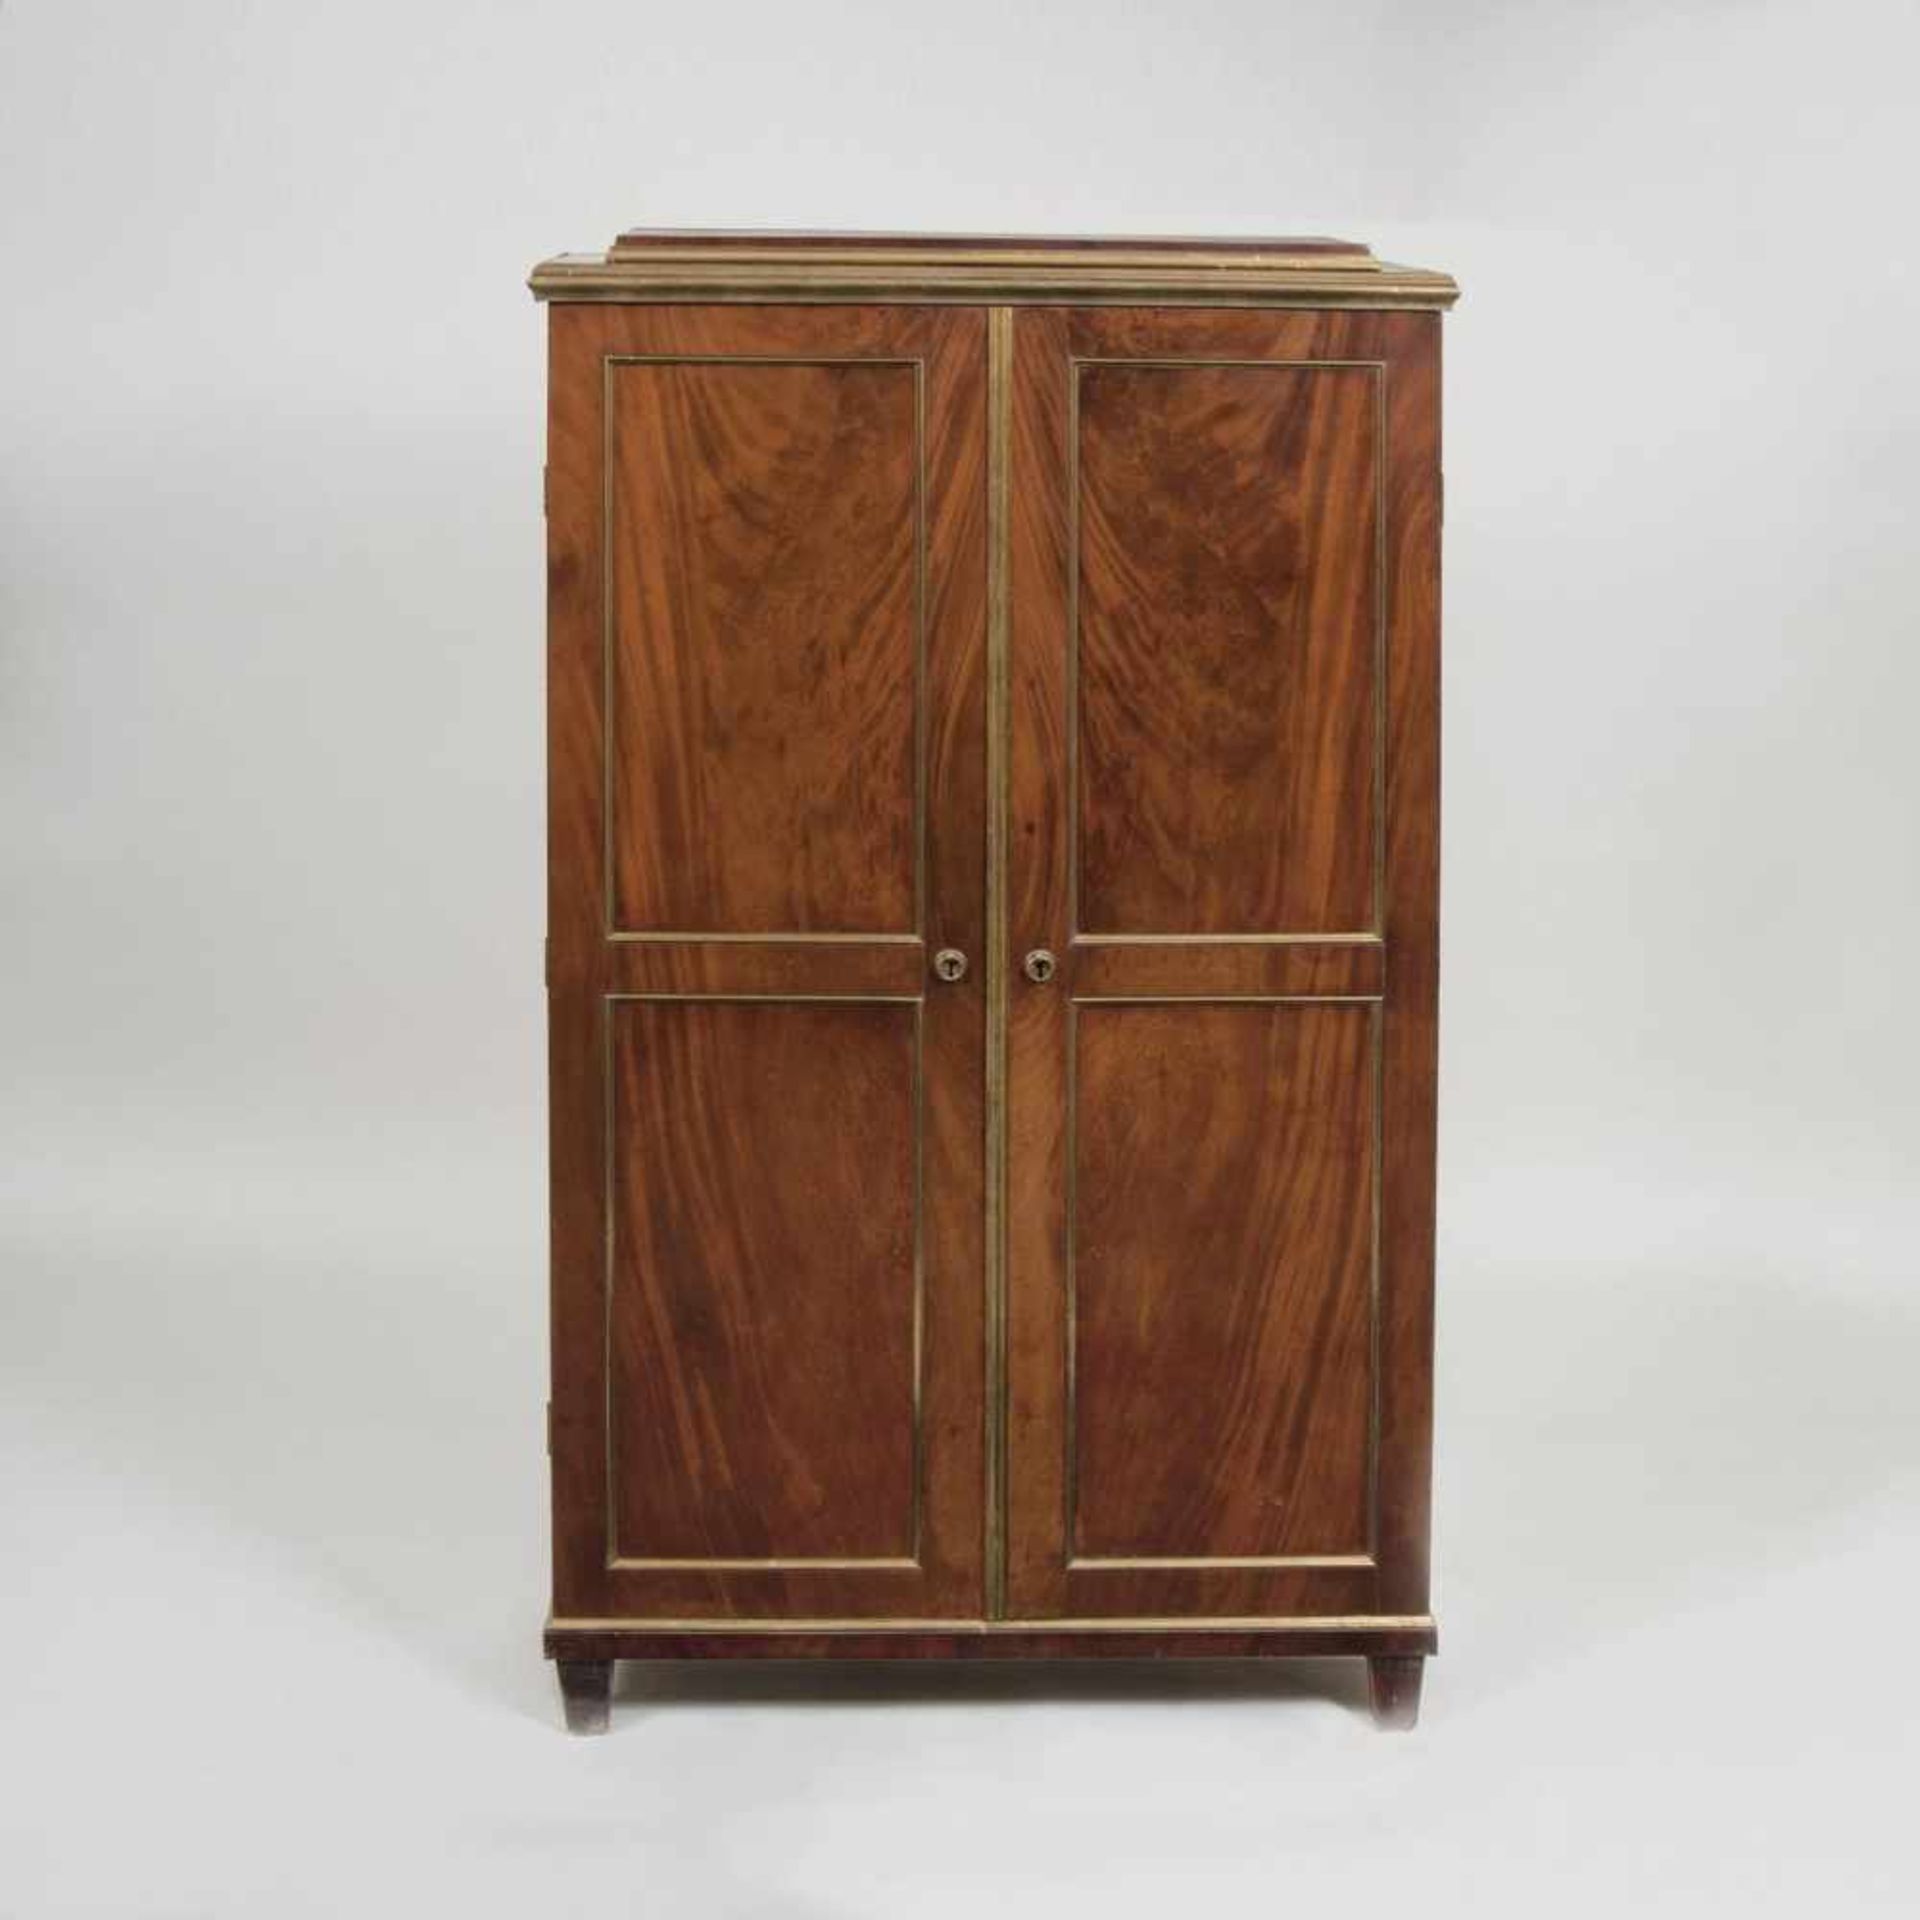 An Empire CabinetFrance early 19th cent. Mahogany, veneered, brass. Two doors, structured by brass